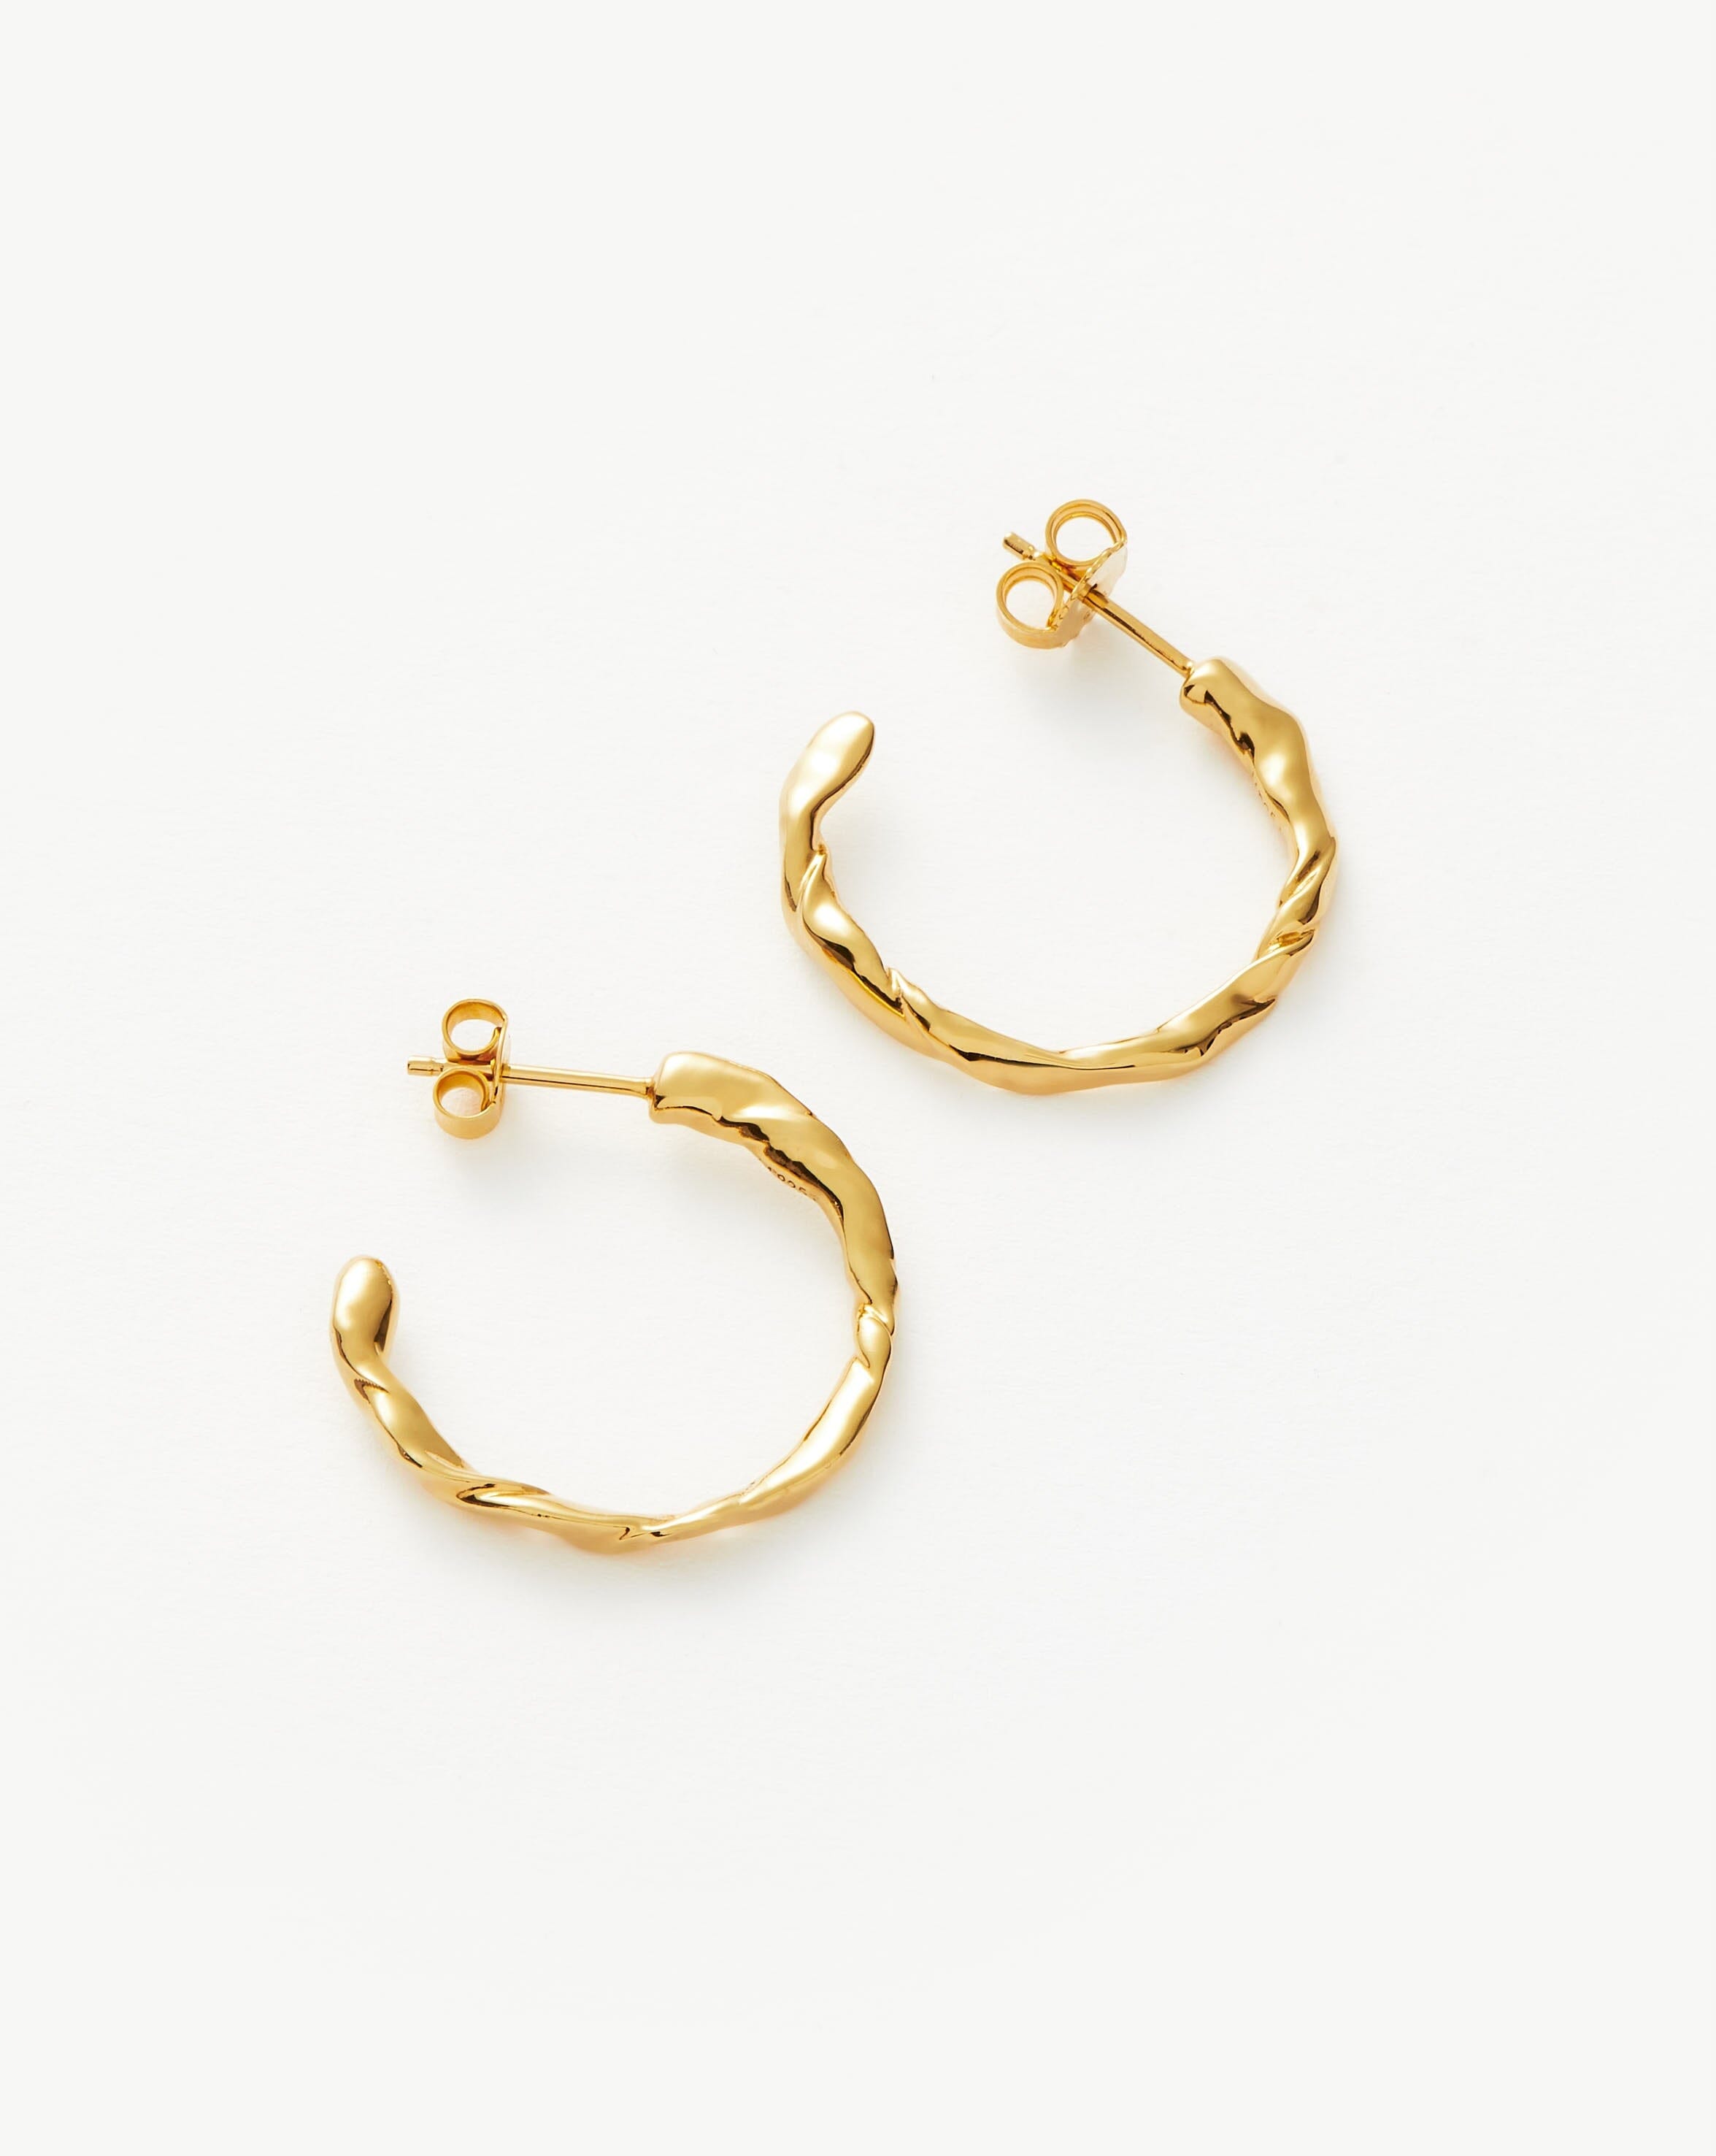 Aggregate 171+ gold plated earrings uk latest